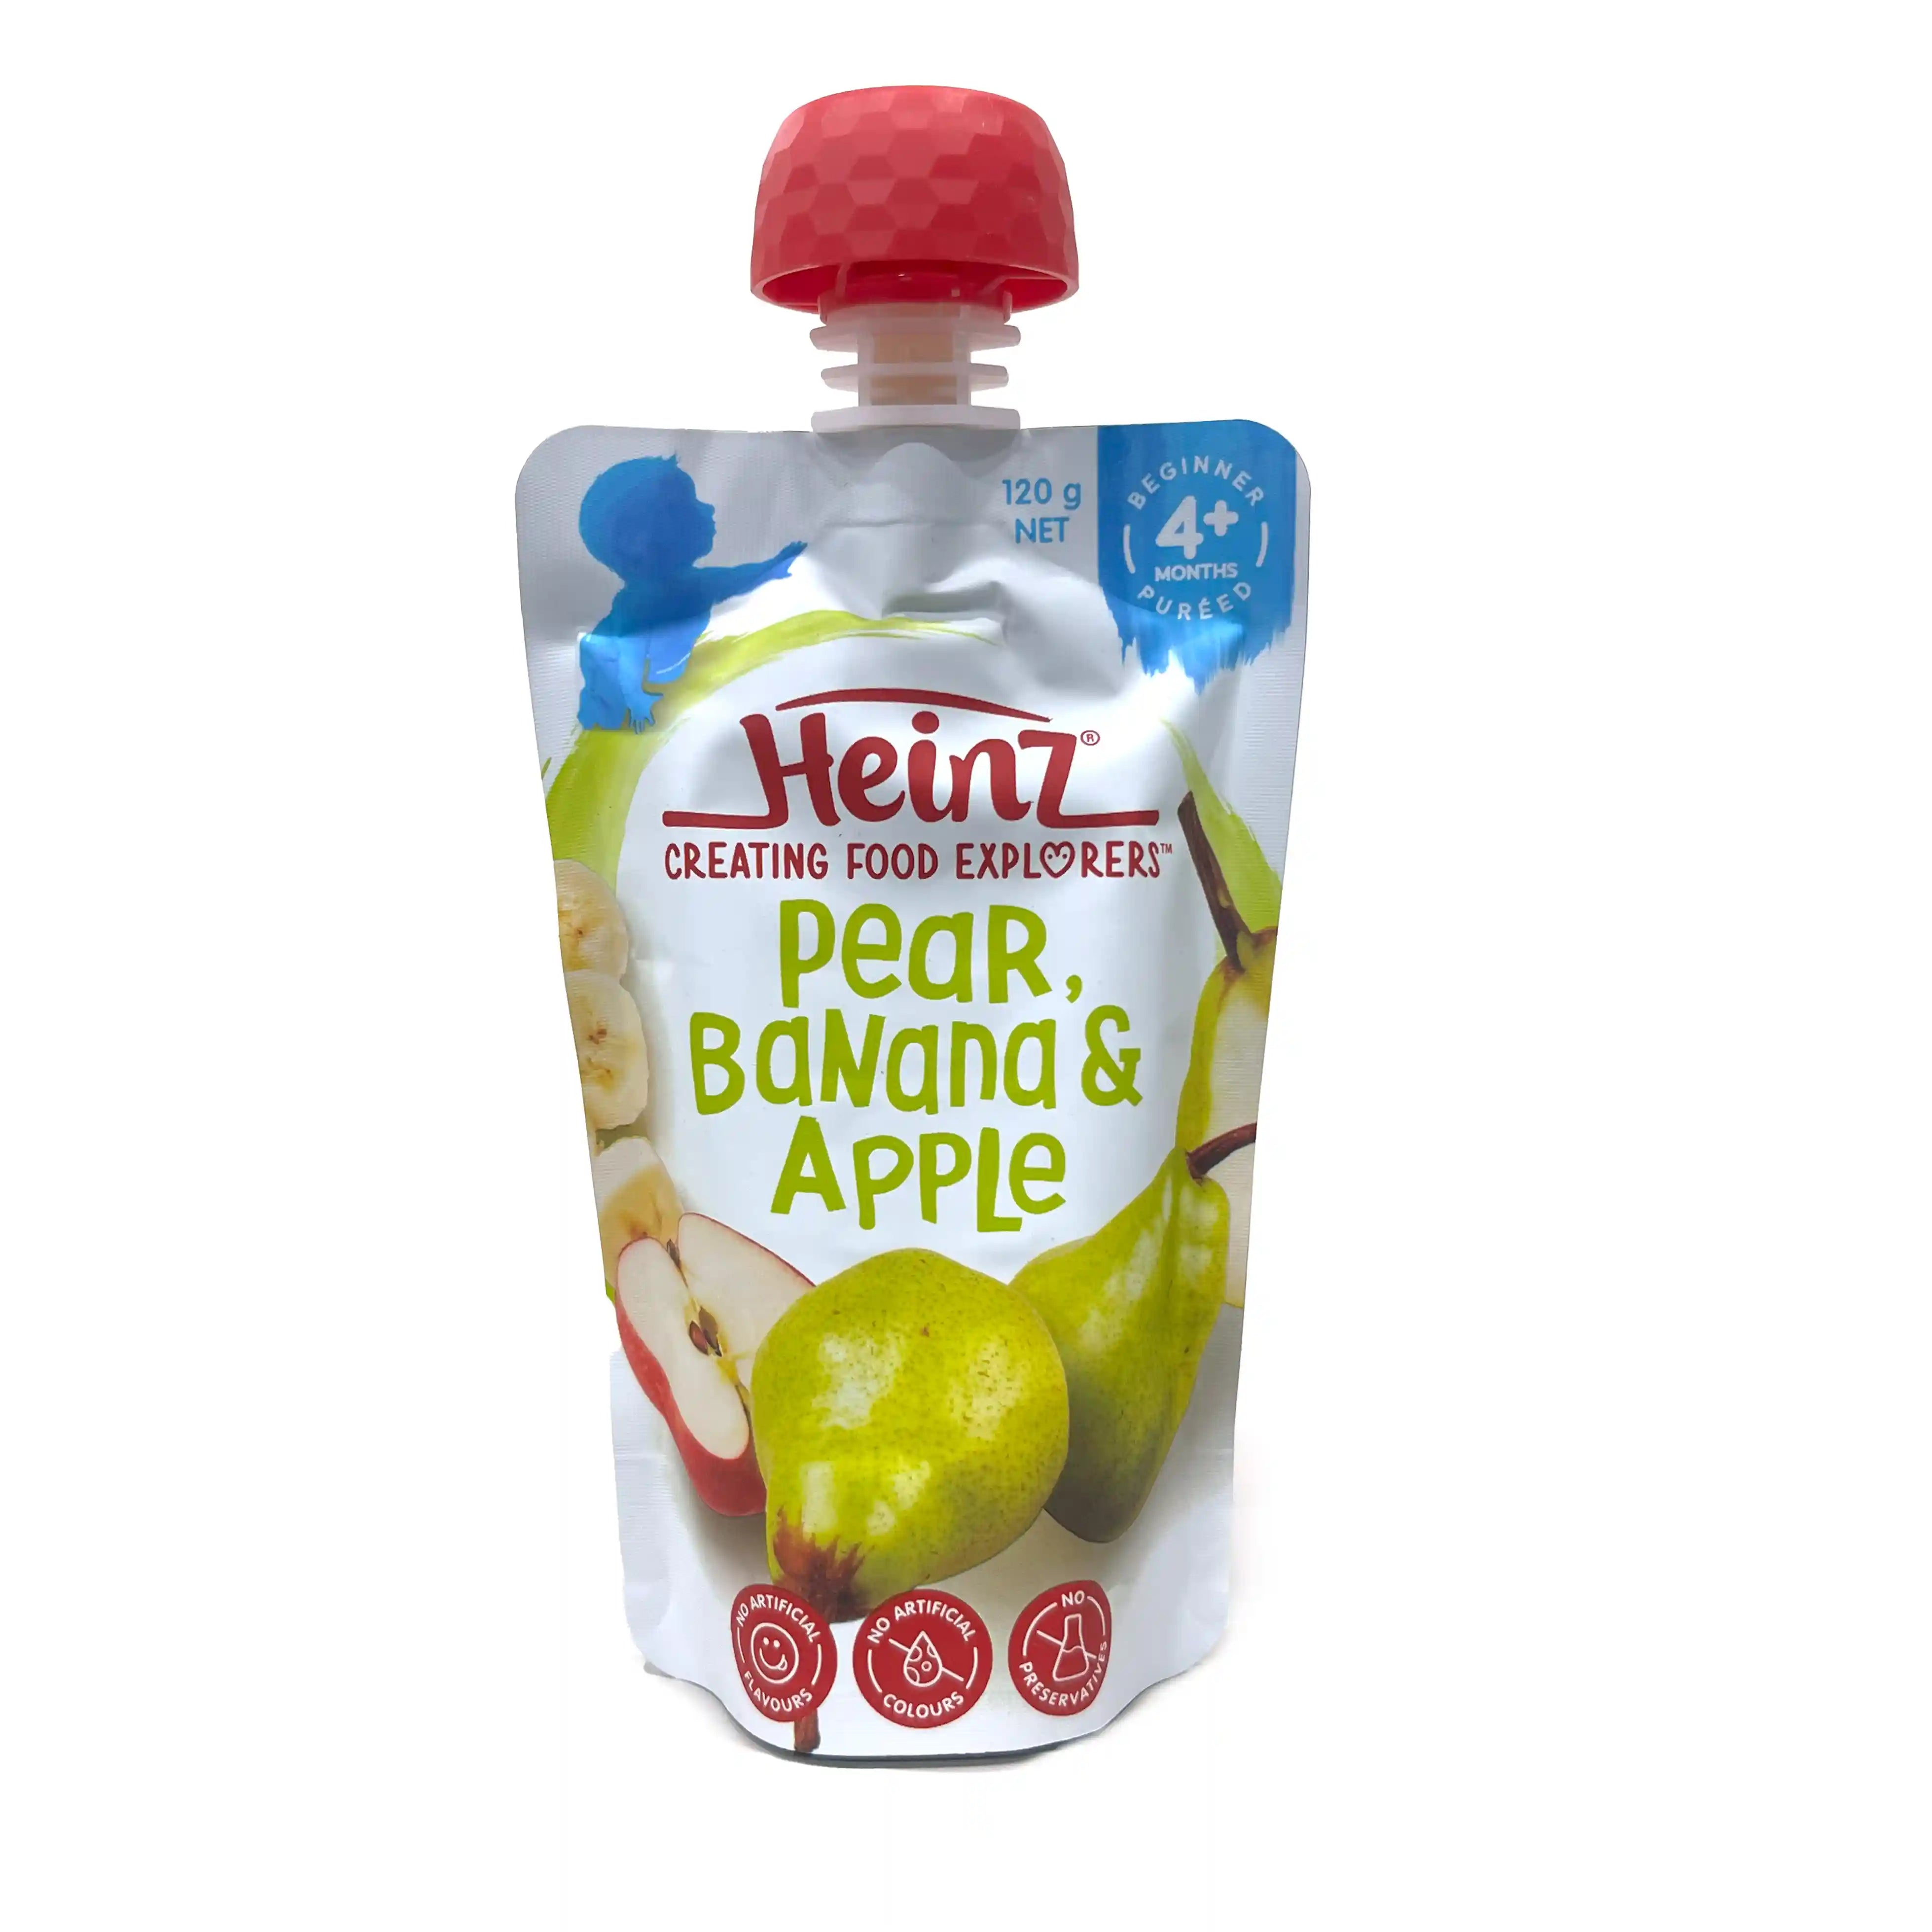 Buy Heinz Puree with Pear, Banana & Apple for your Baby, 4+months, 120gms Online in India at uyyaala.com